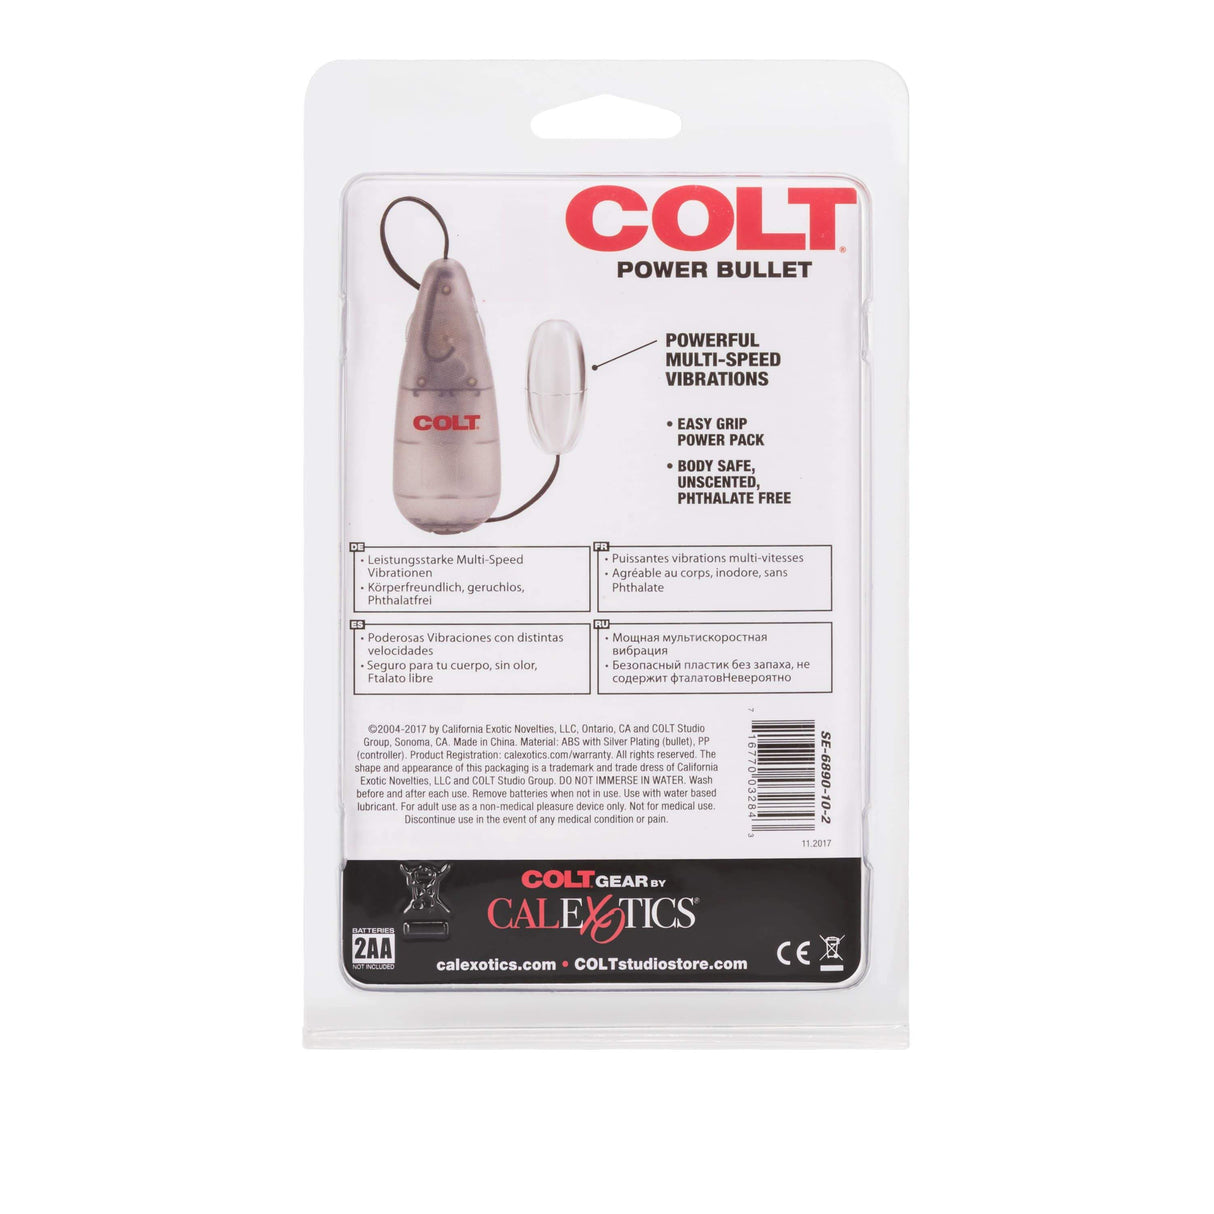 California Exotics - COLT Multi Speed Power Pak Bullet with Remote (Silver) CE1858 CherryAffairs